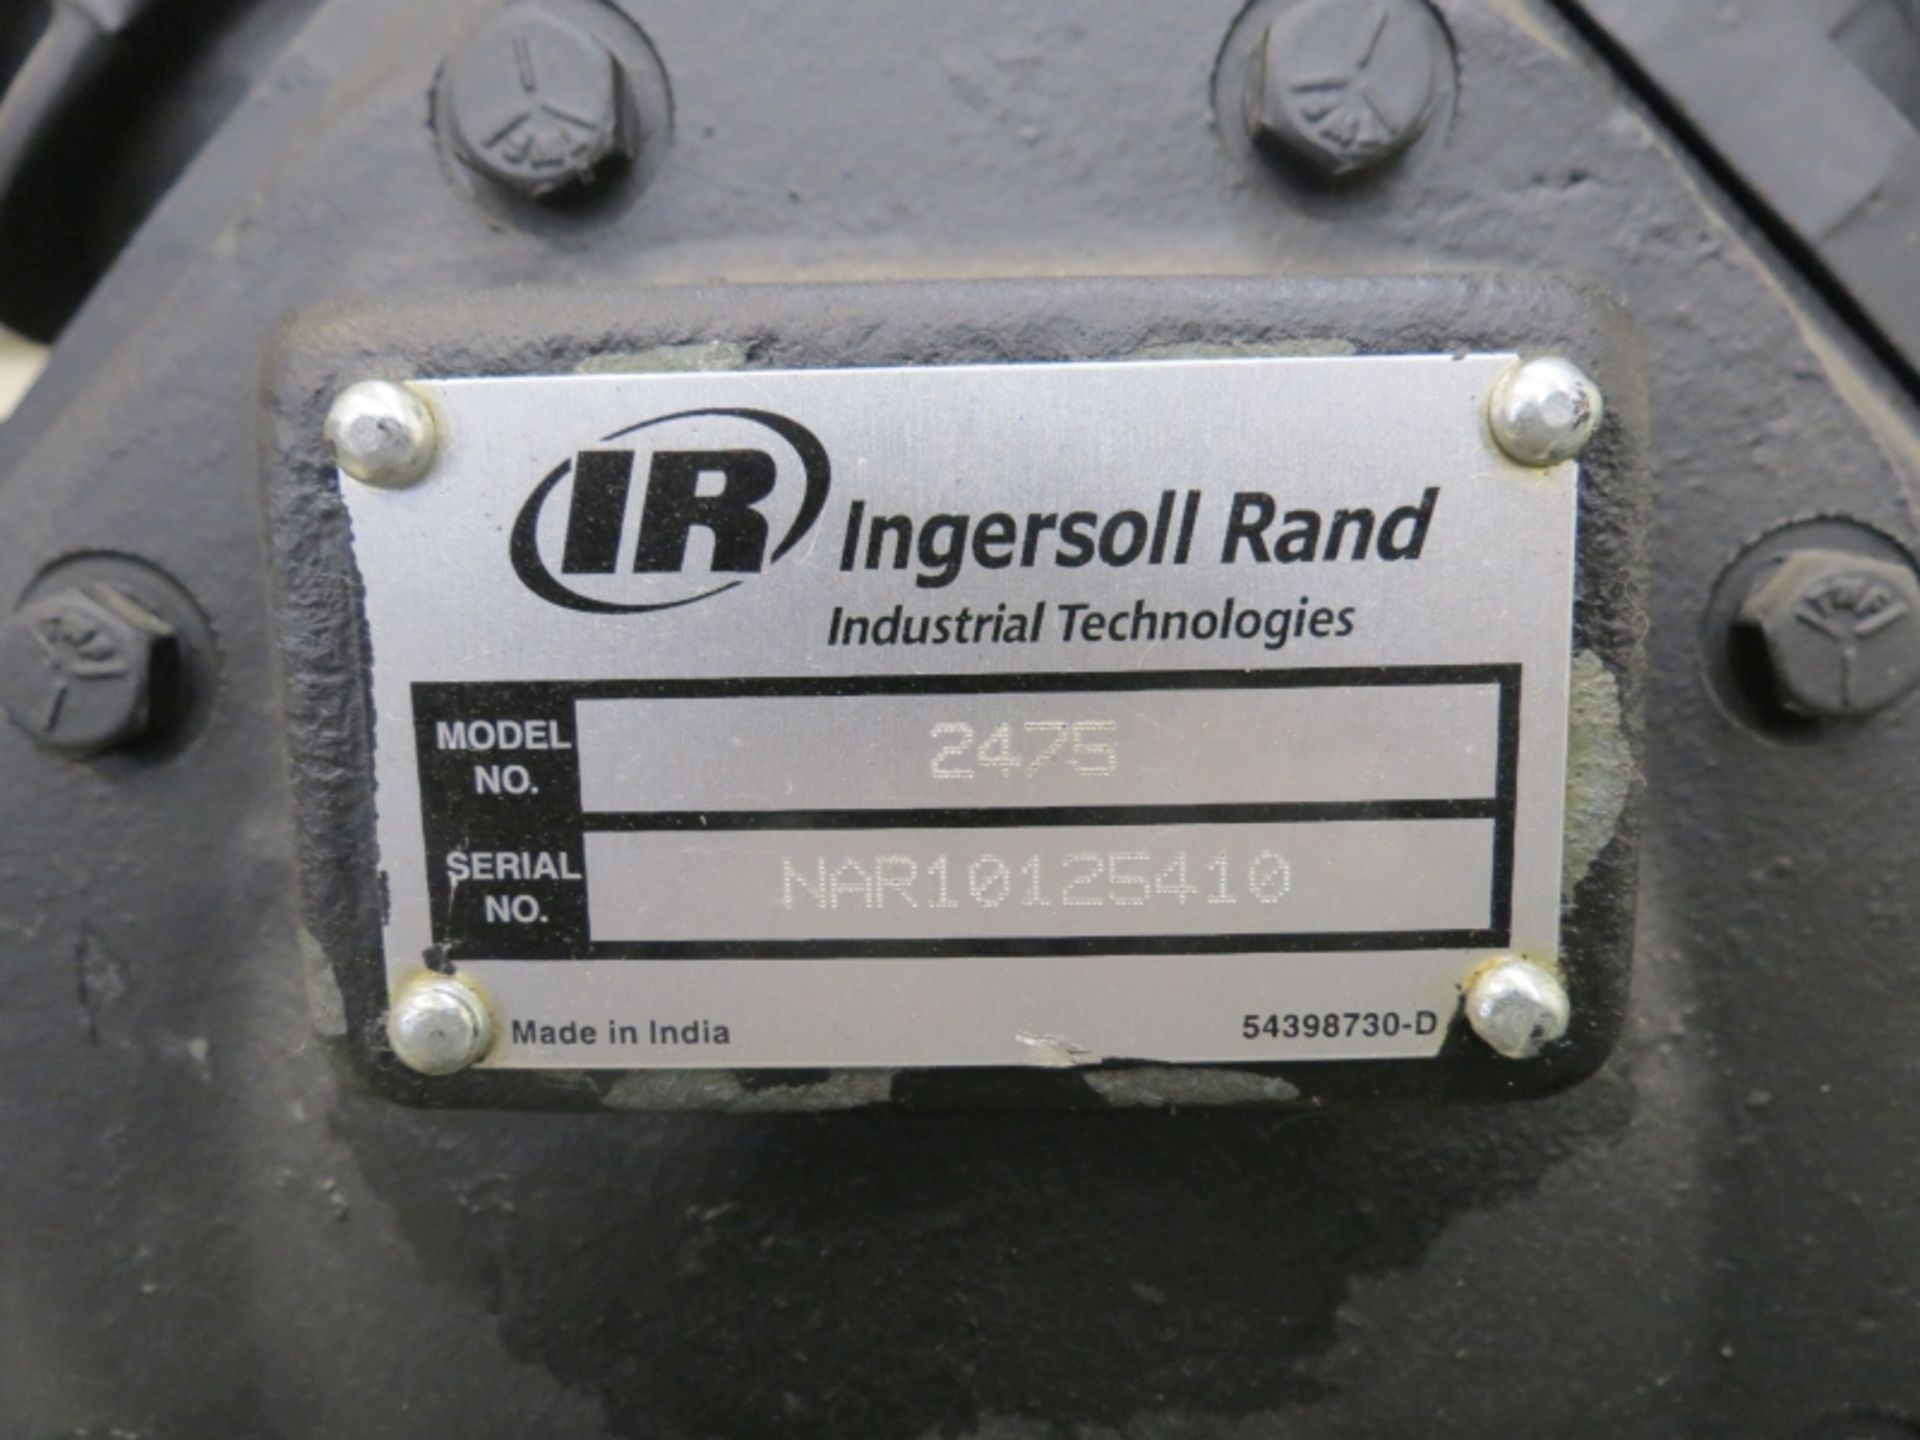 Ingersoll Rand 2475 Air Compressor, S/N NAR10125410 - Image 5 of 5